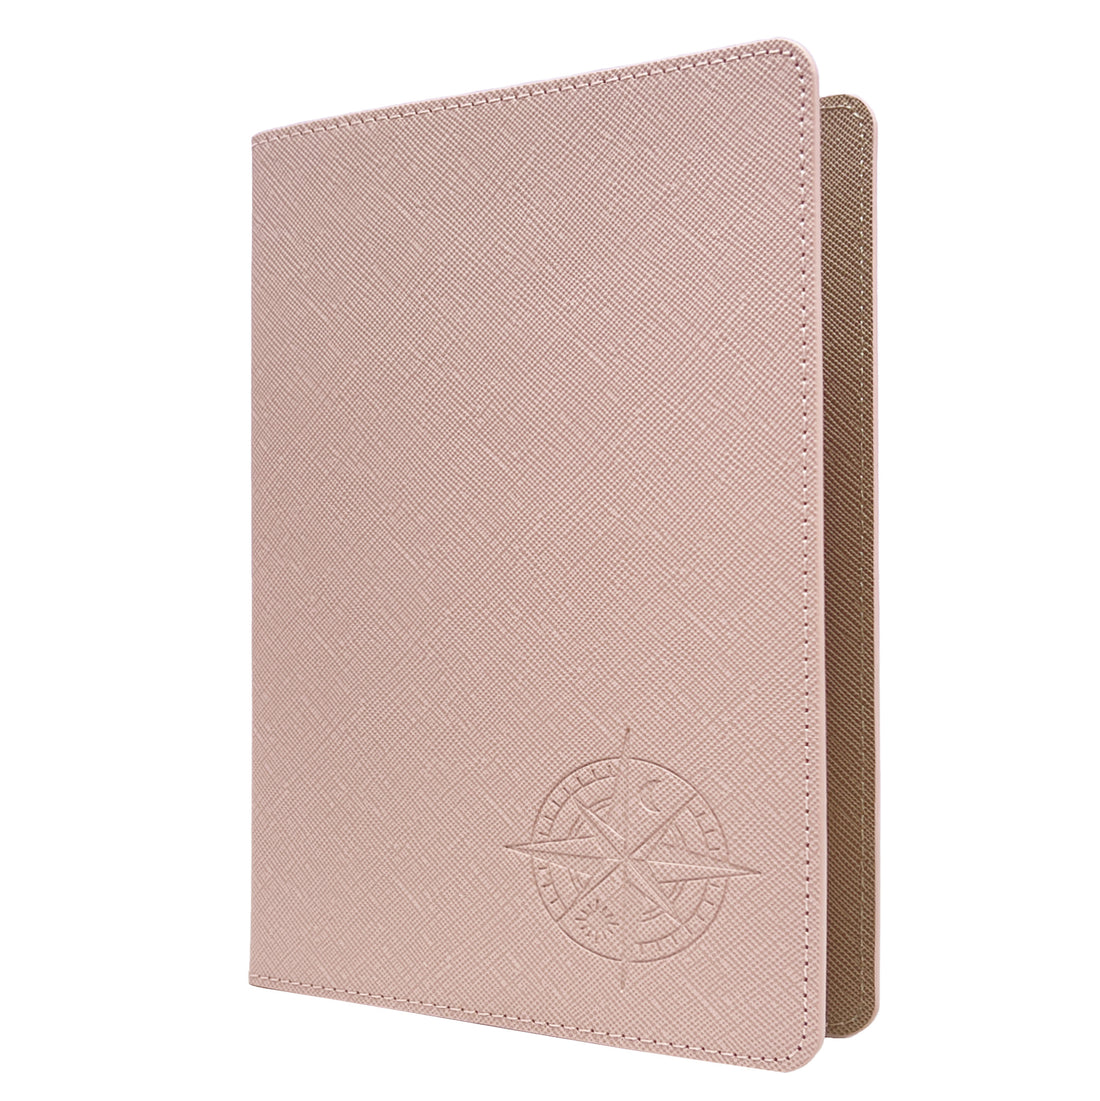 Personal Size DUO Planner【Powder Rose】